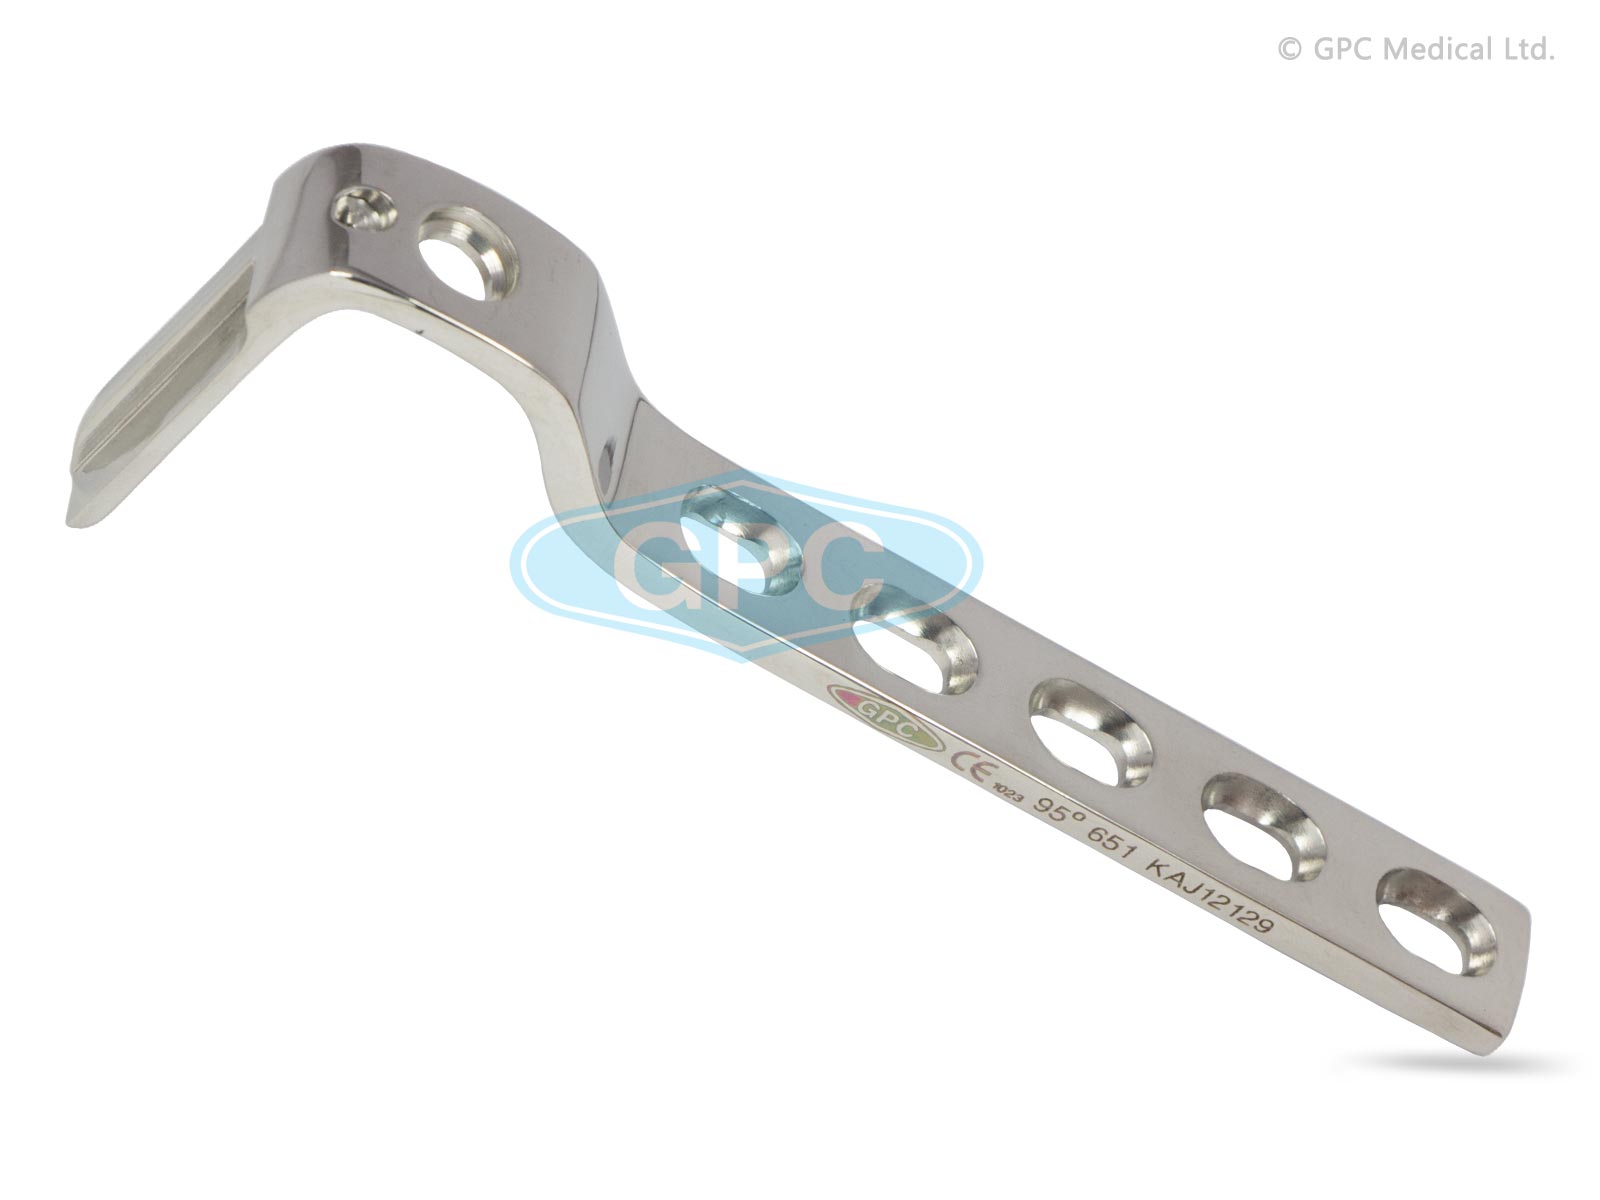 Angled Blade Plates For Intertrochanteric femoral Osteotomies in Small Adults & Adolescents